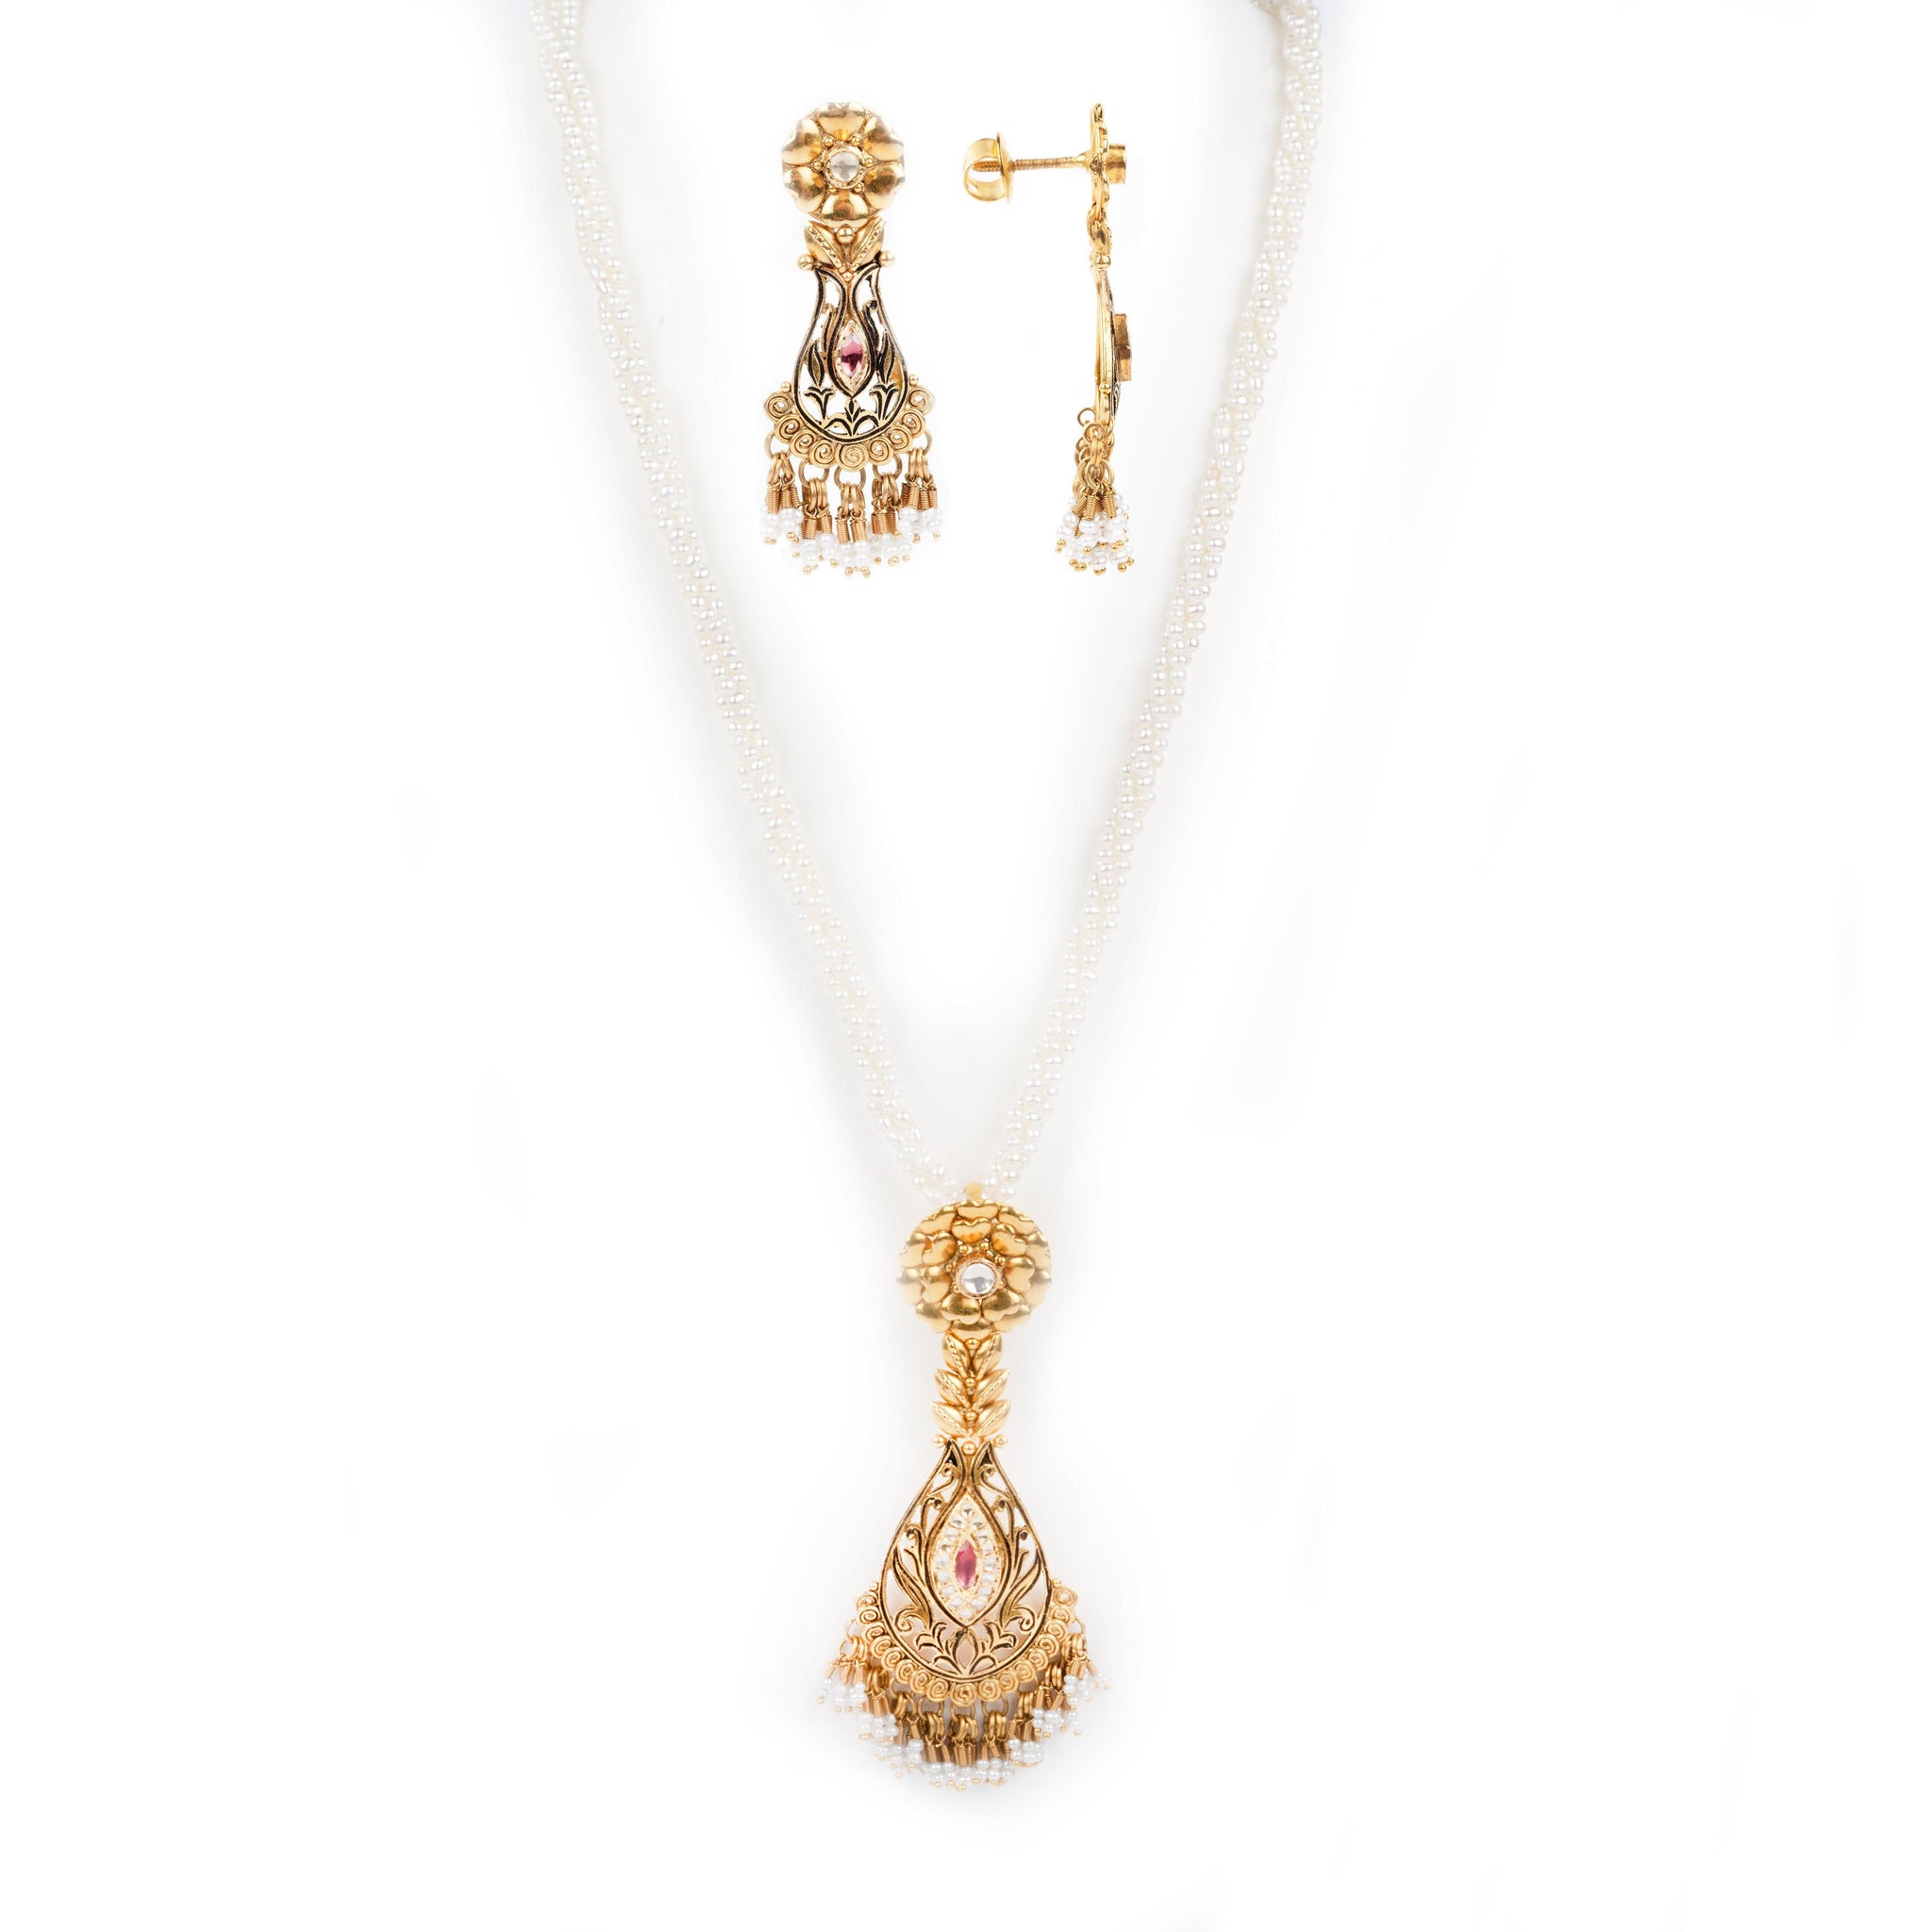 22ct Gold Antiquated Look Necklace, Pendant and Earrings set with Pearls (37.6g) N&P&E-4607